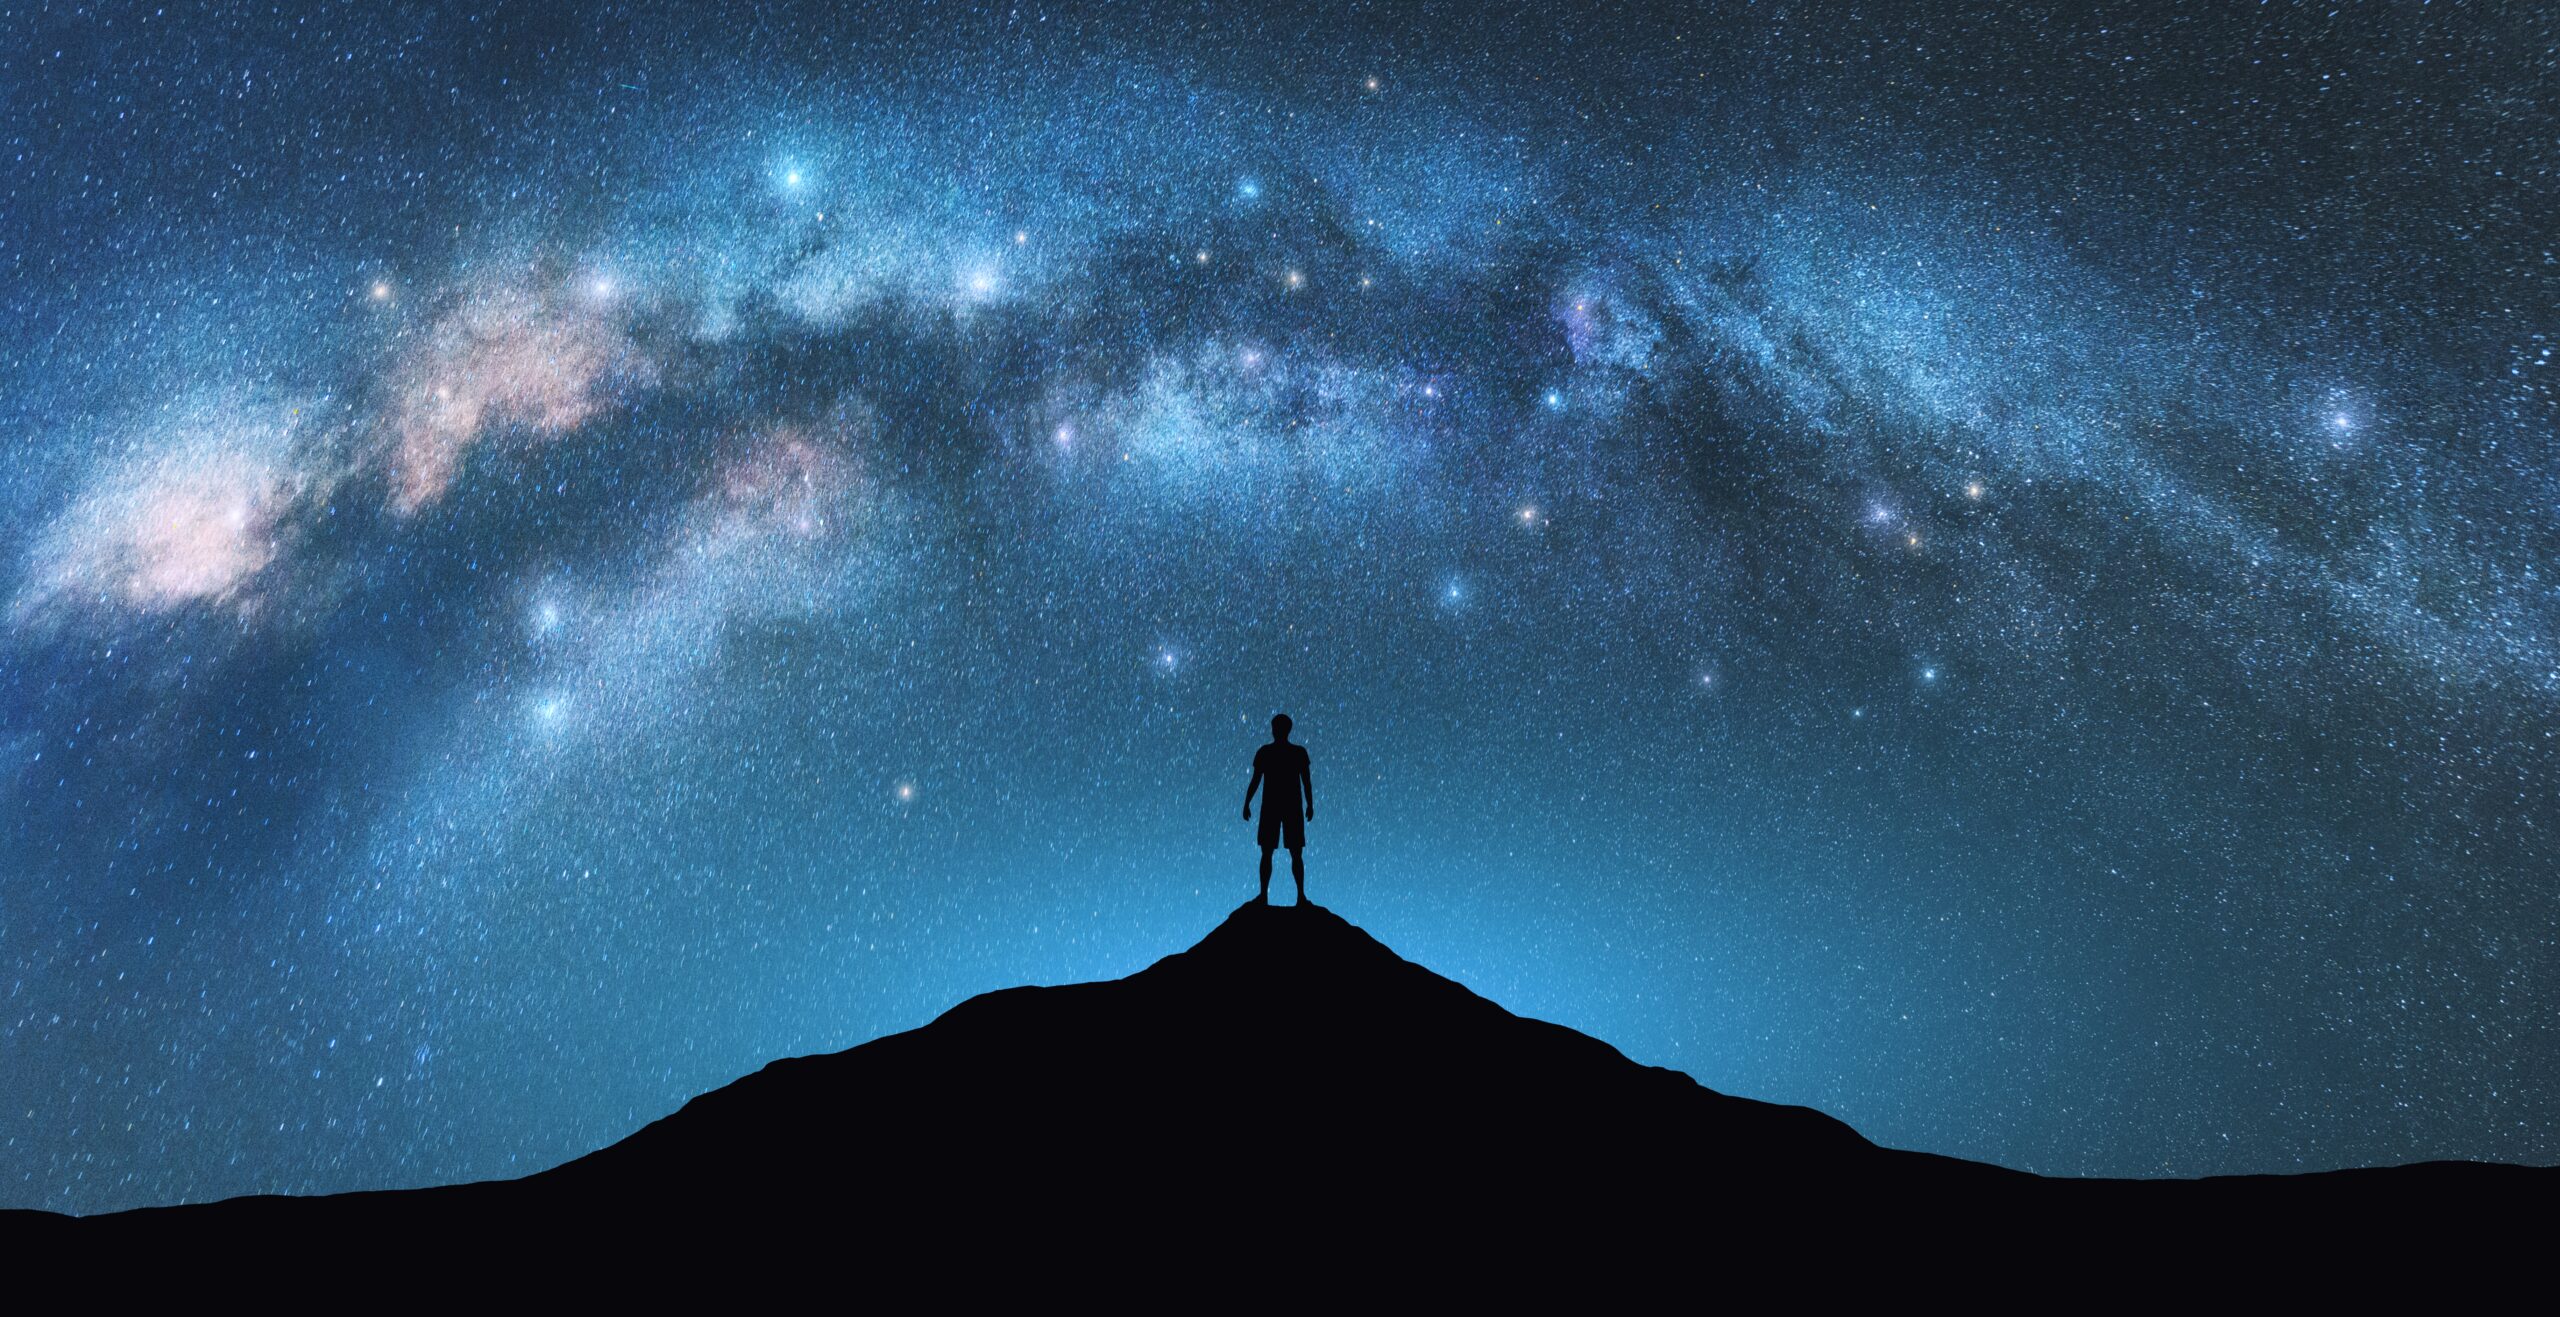 A person stands on a mountain beneath a starry sky